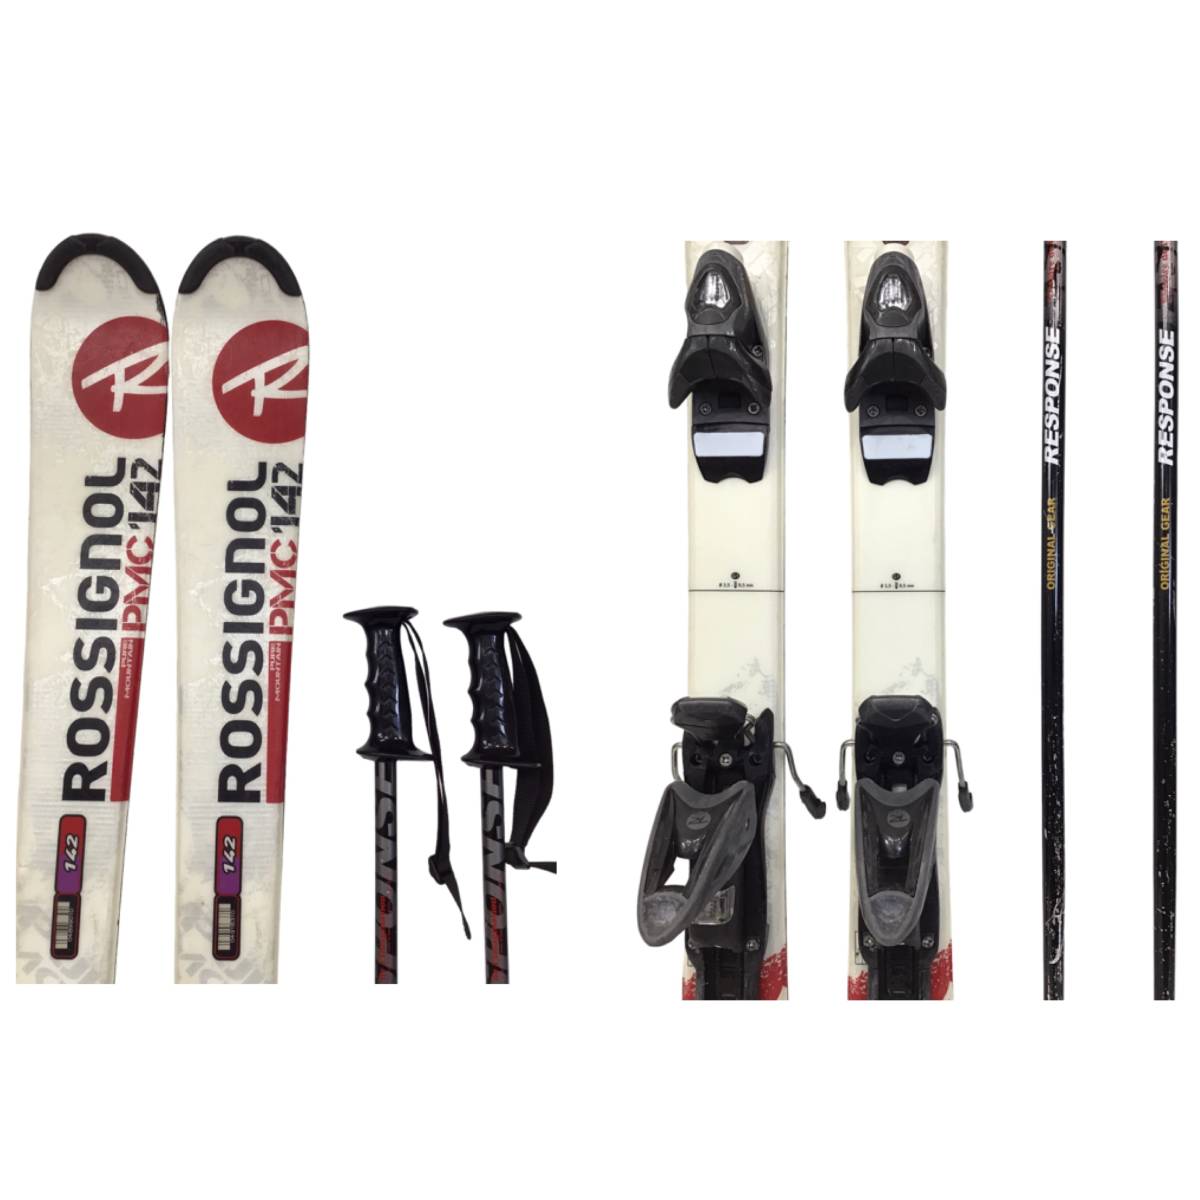 24R030 S ROSSIGNOL ロシニョール スキー PURE MOUNTAIN PMC142・ポール実寸112.5㎝・ケース セット 中古品_画像3